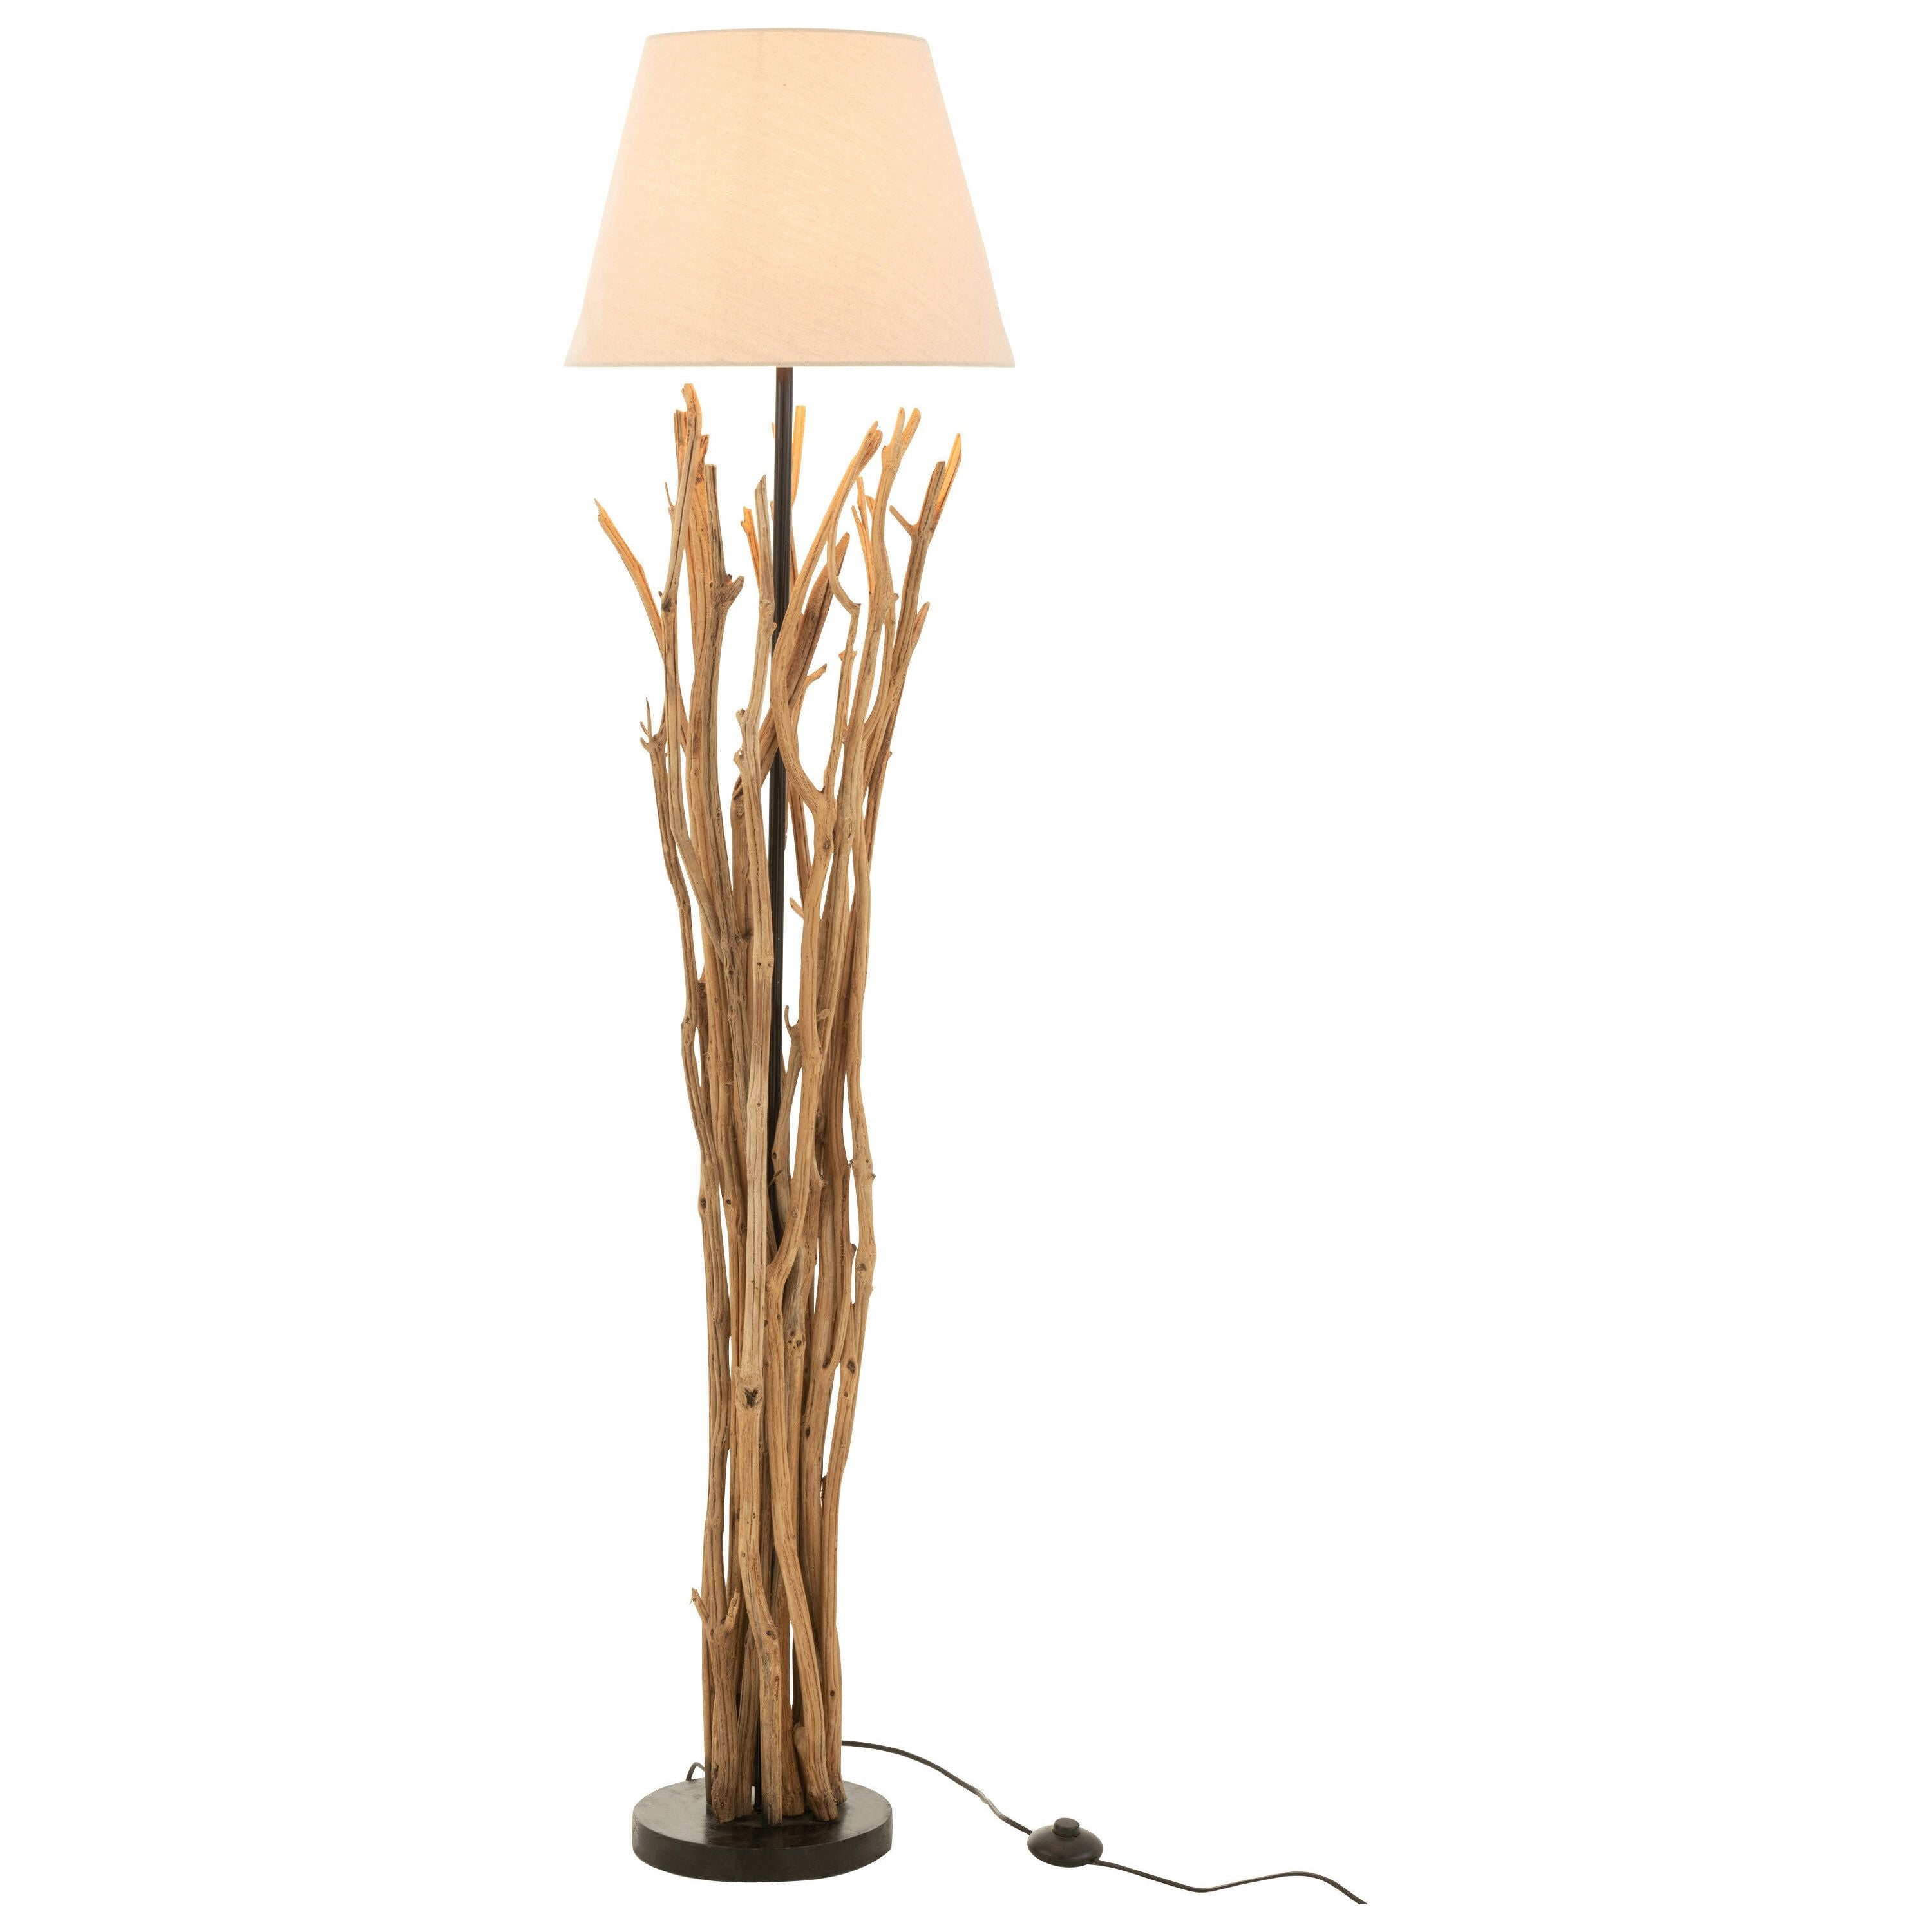 Standing Lamp Branches Chestnut Wood Natural